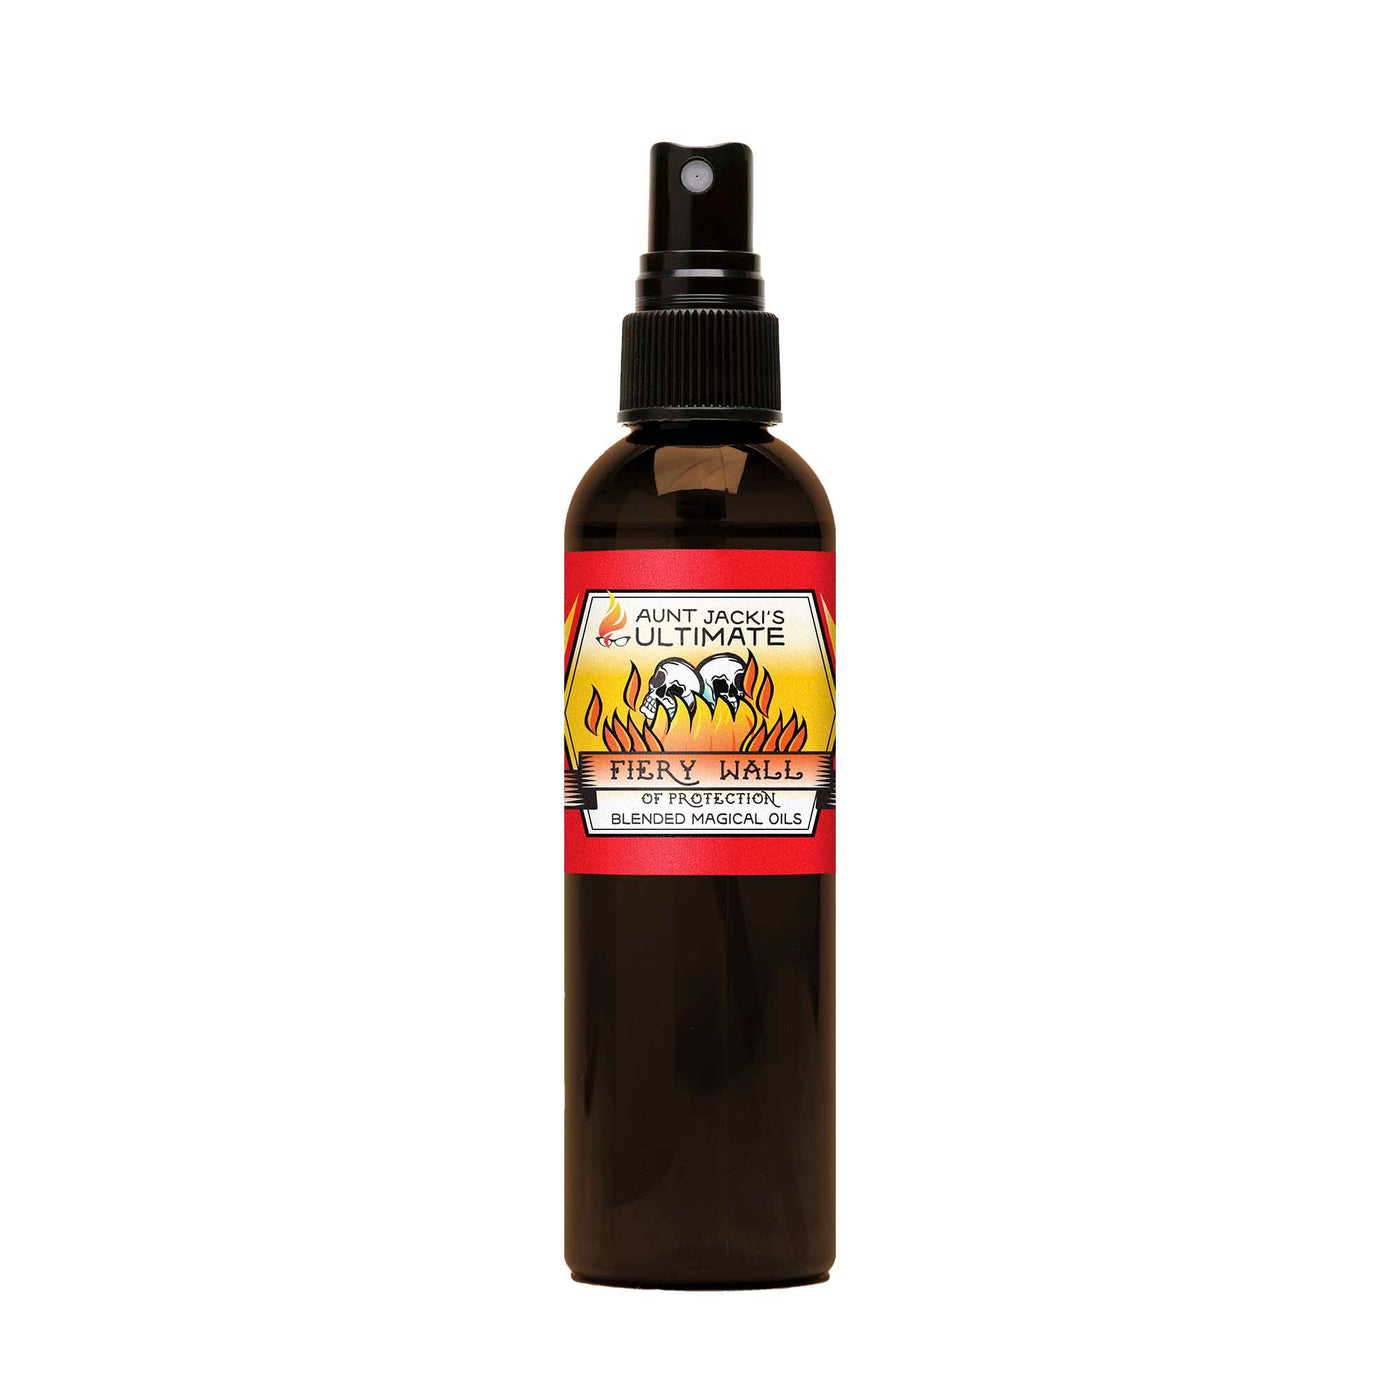 Coventry Creations Aunt Jacki’s Ultimate Fiery Wall of Protection Spray bottle